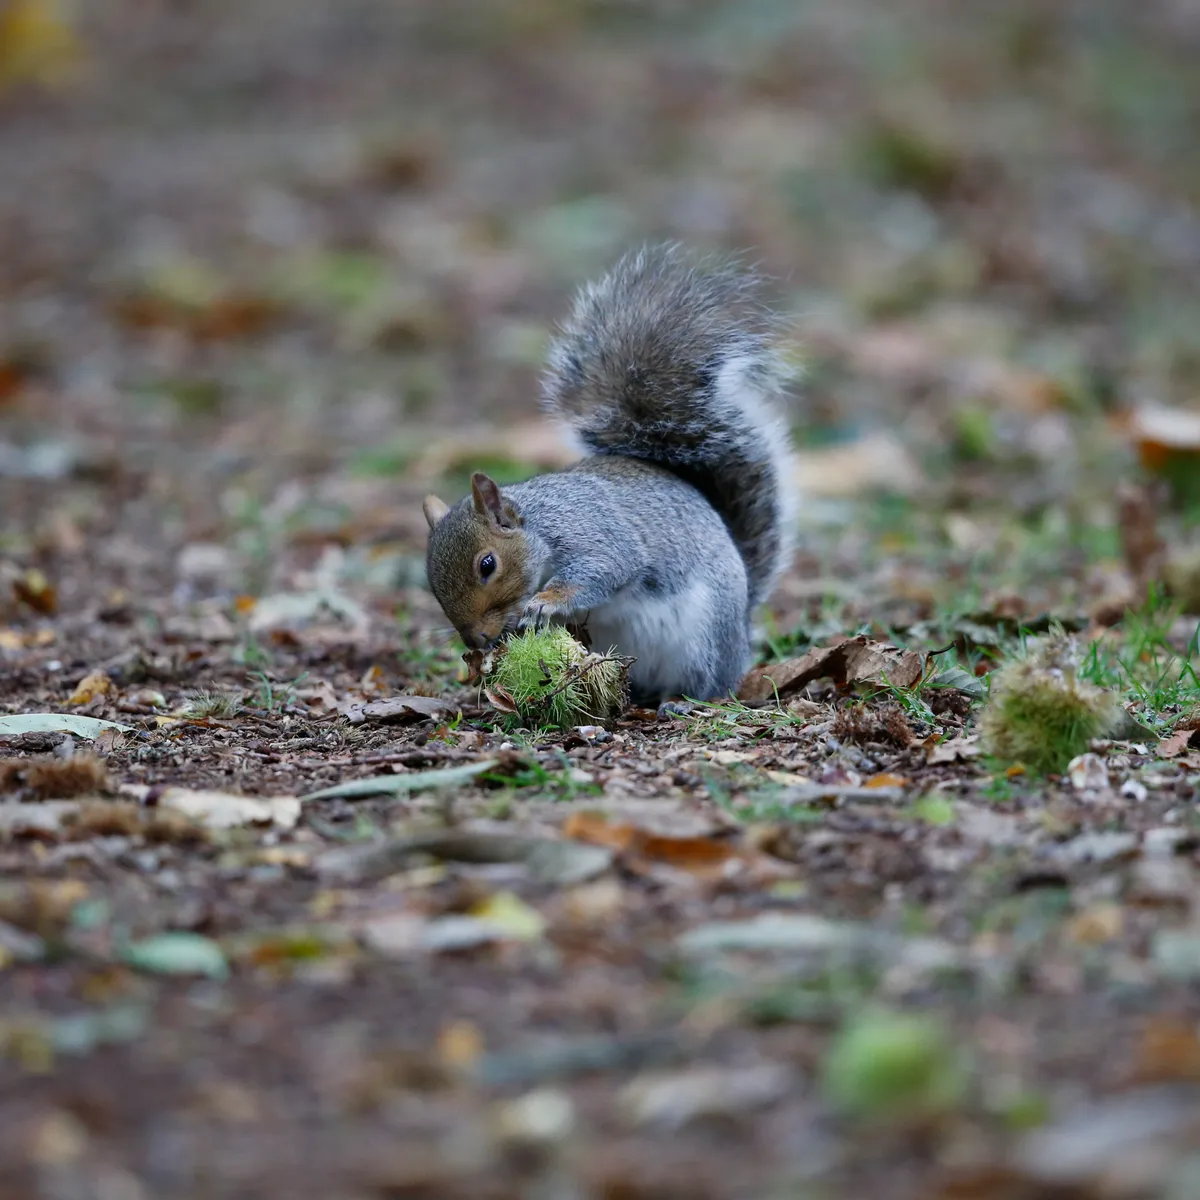 This shot of a grey squirrel was taken with an ordinary camera, to demonstrate how you do not need expensive equipment to take good quality images. © David Bailey